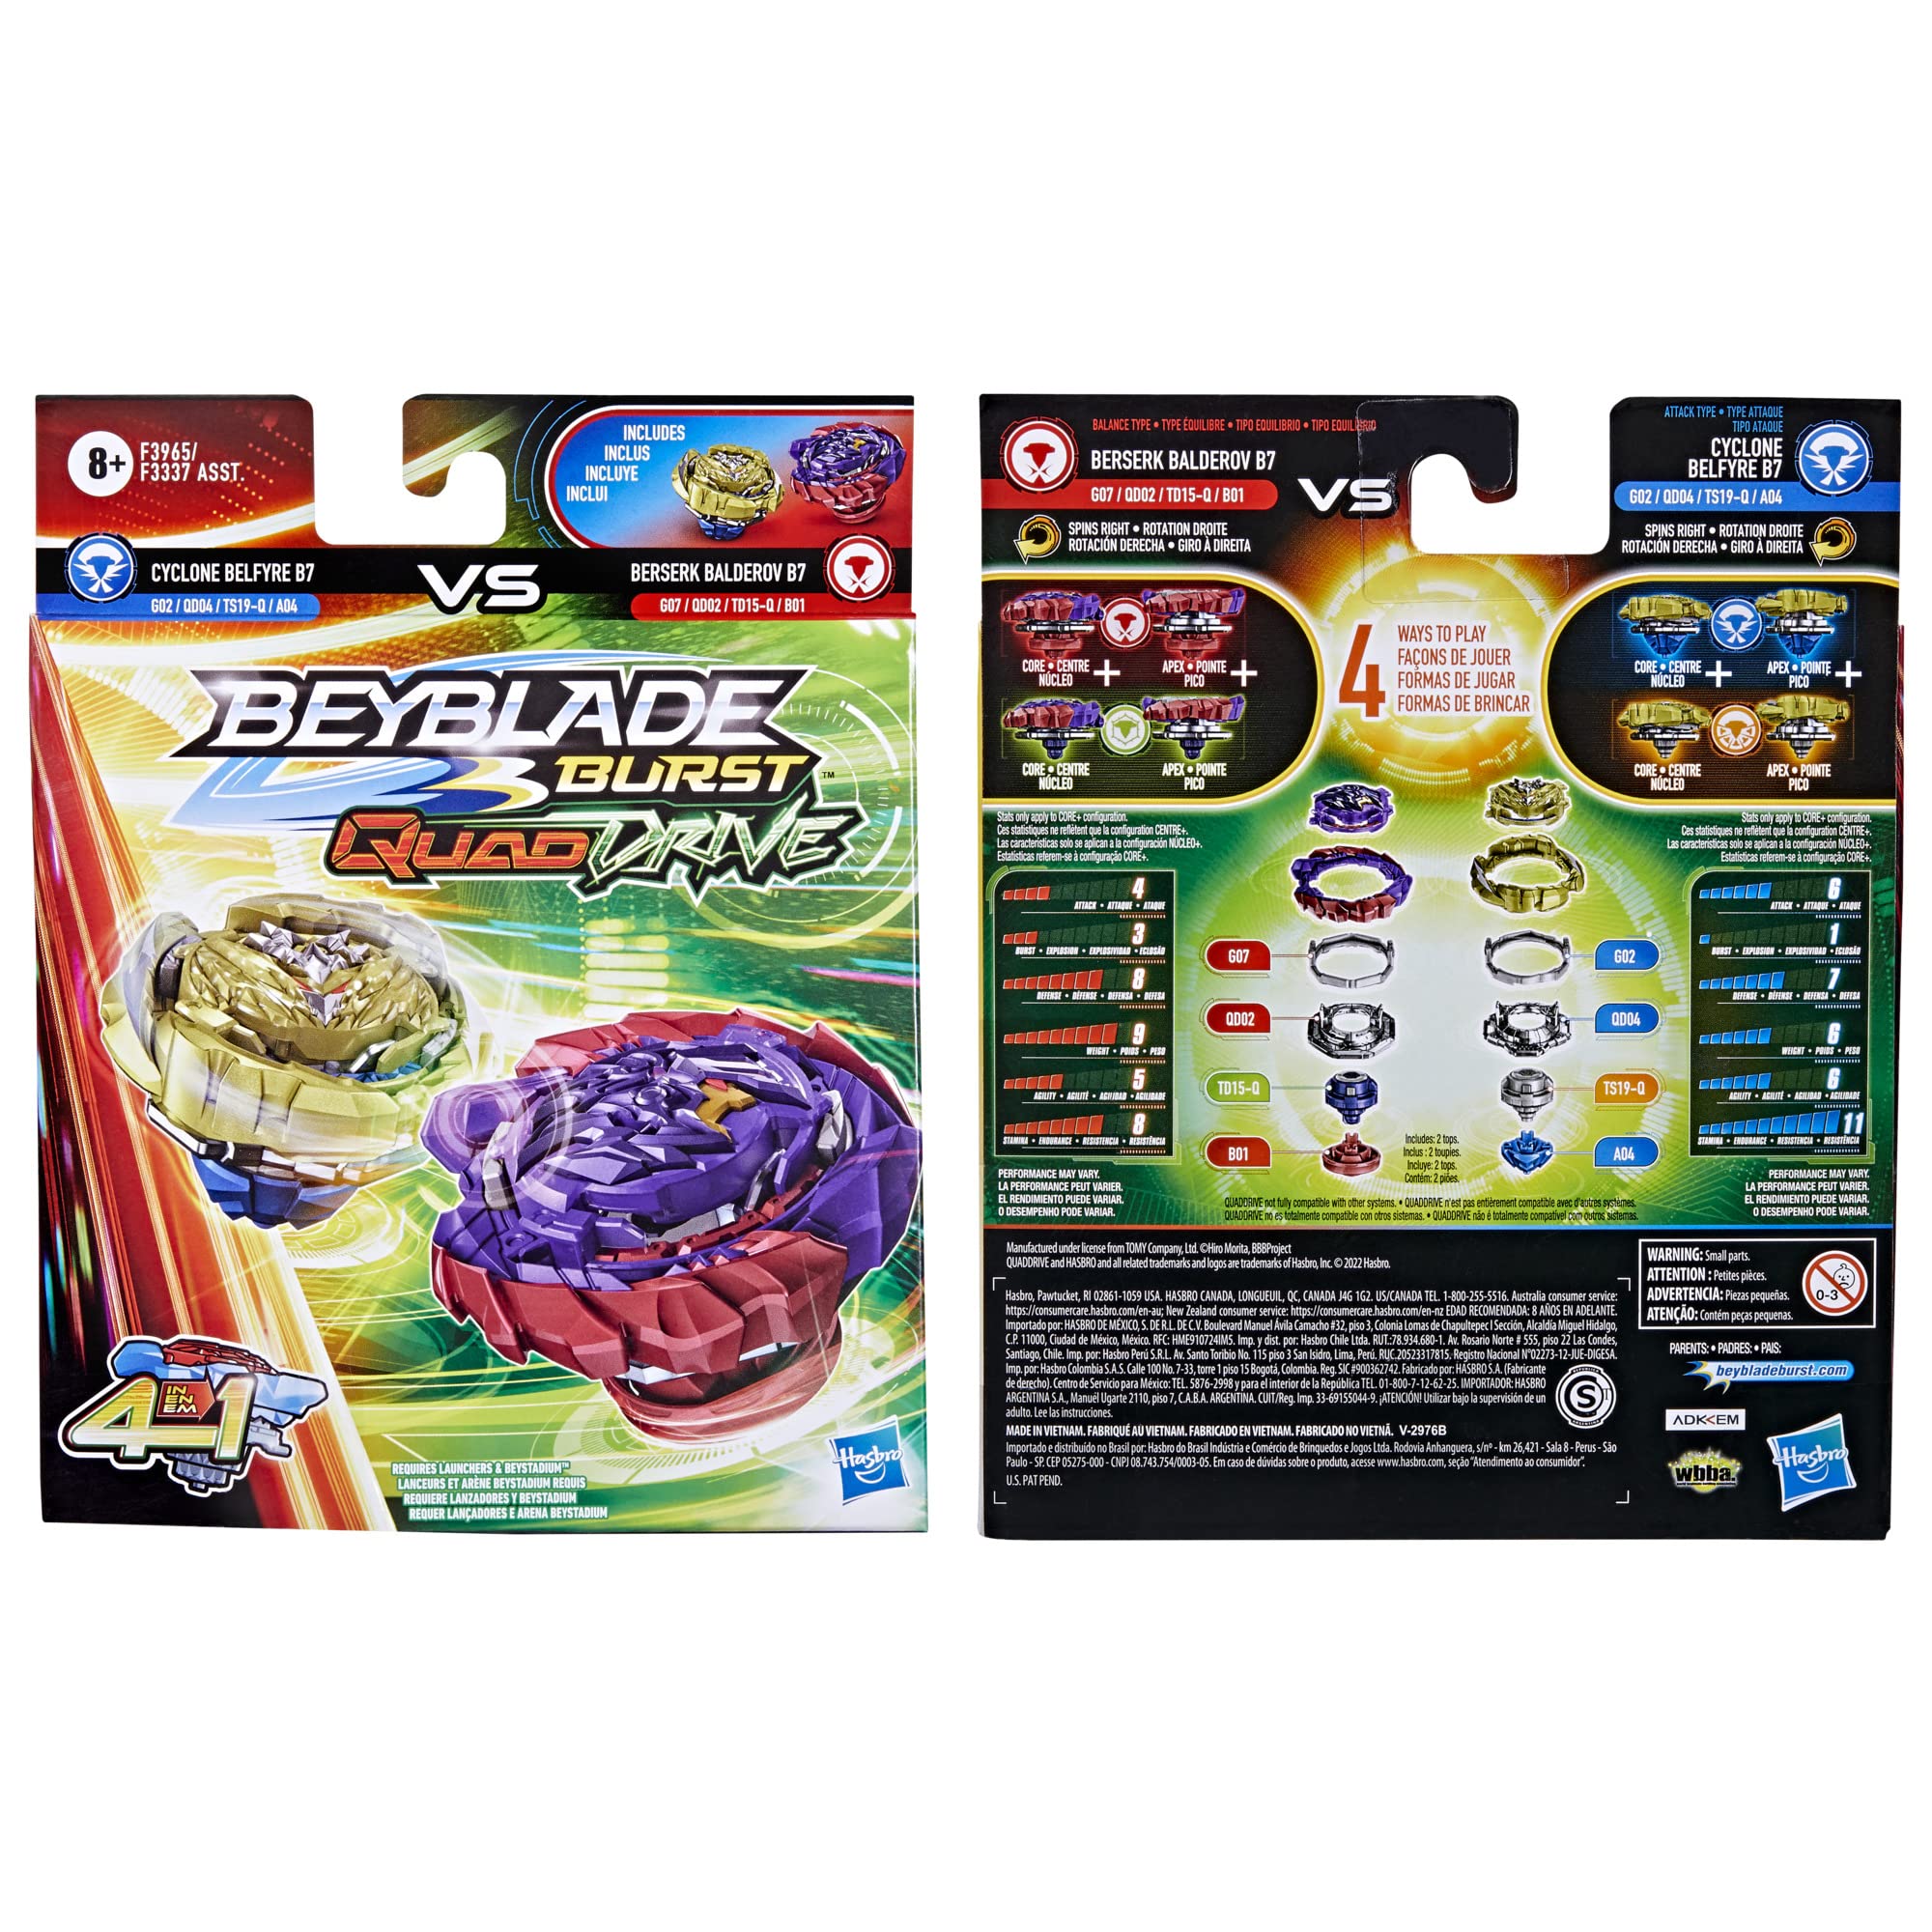 Beyblade Burst QuadDrive Berserk Balderov B7 and Cyclone Belfyre B7 Spinning Top Dual Pack -- 2 Battling Game Top Toy for Kids Ages 8 and Up